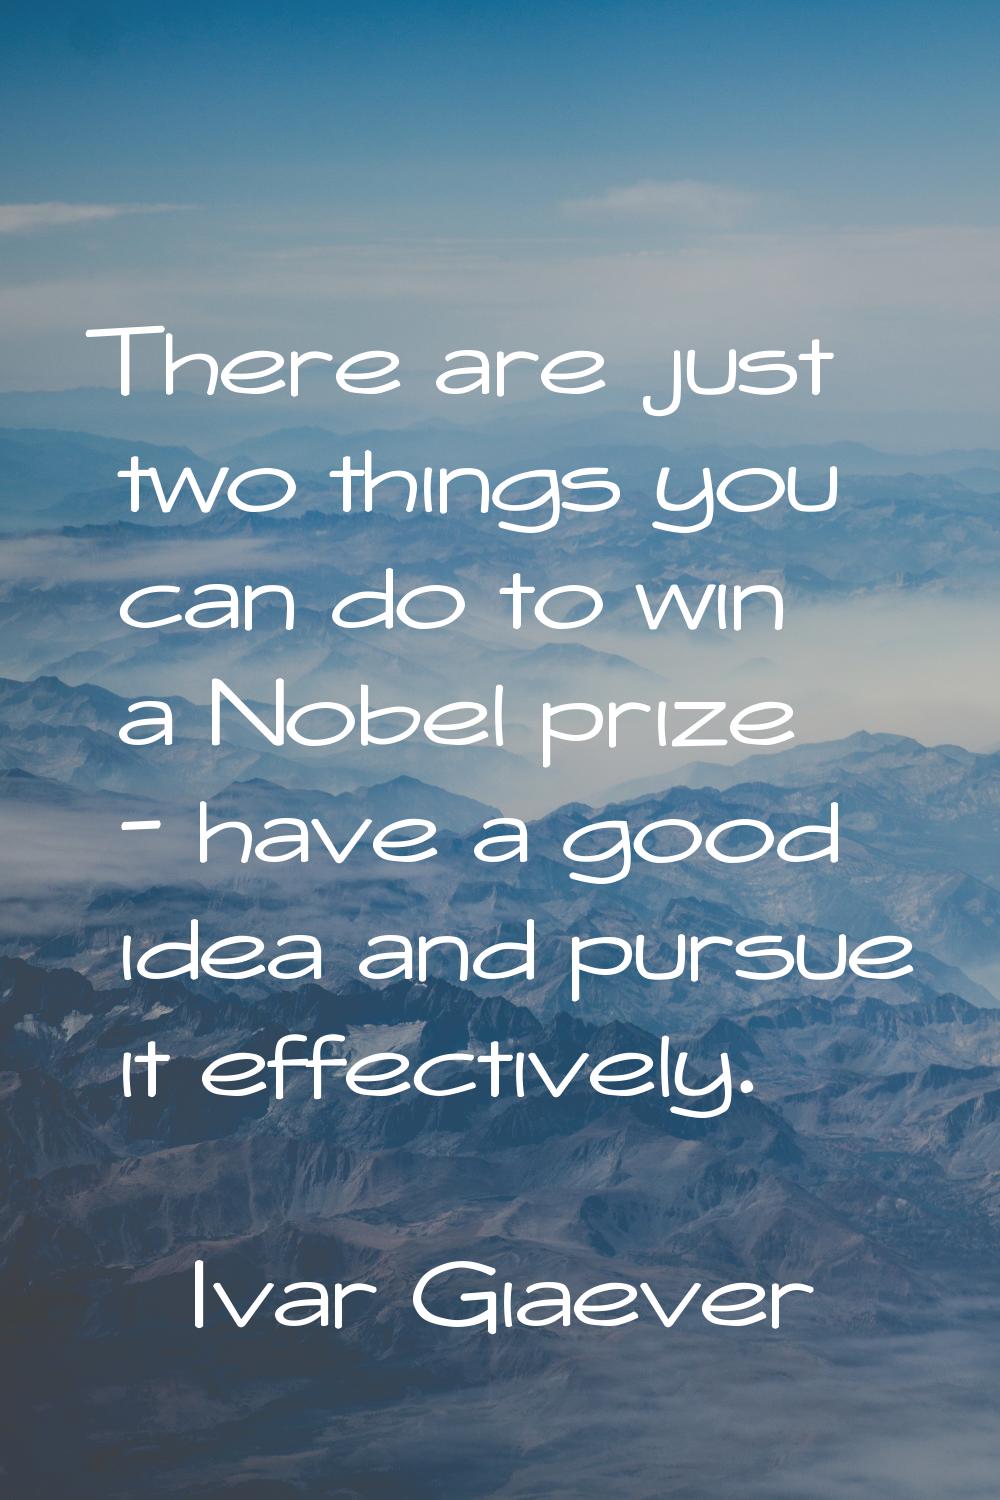 There are just two things you can do to win a Nobel prize - have a good idea and pursue it effectiv